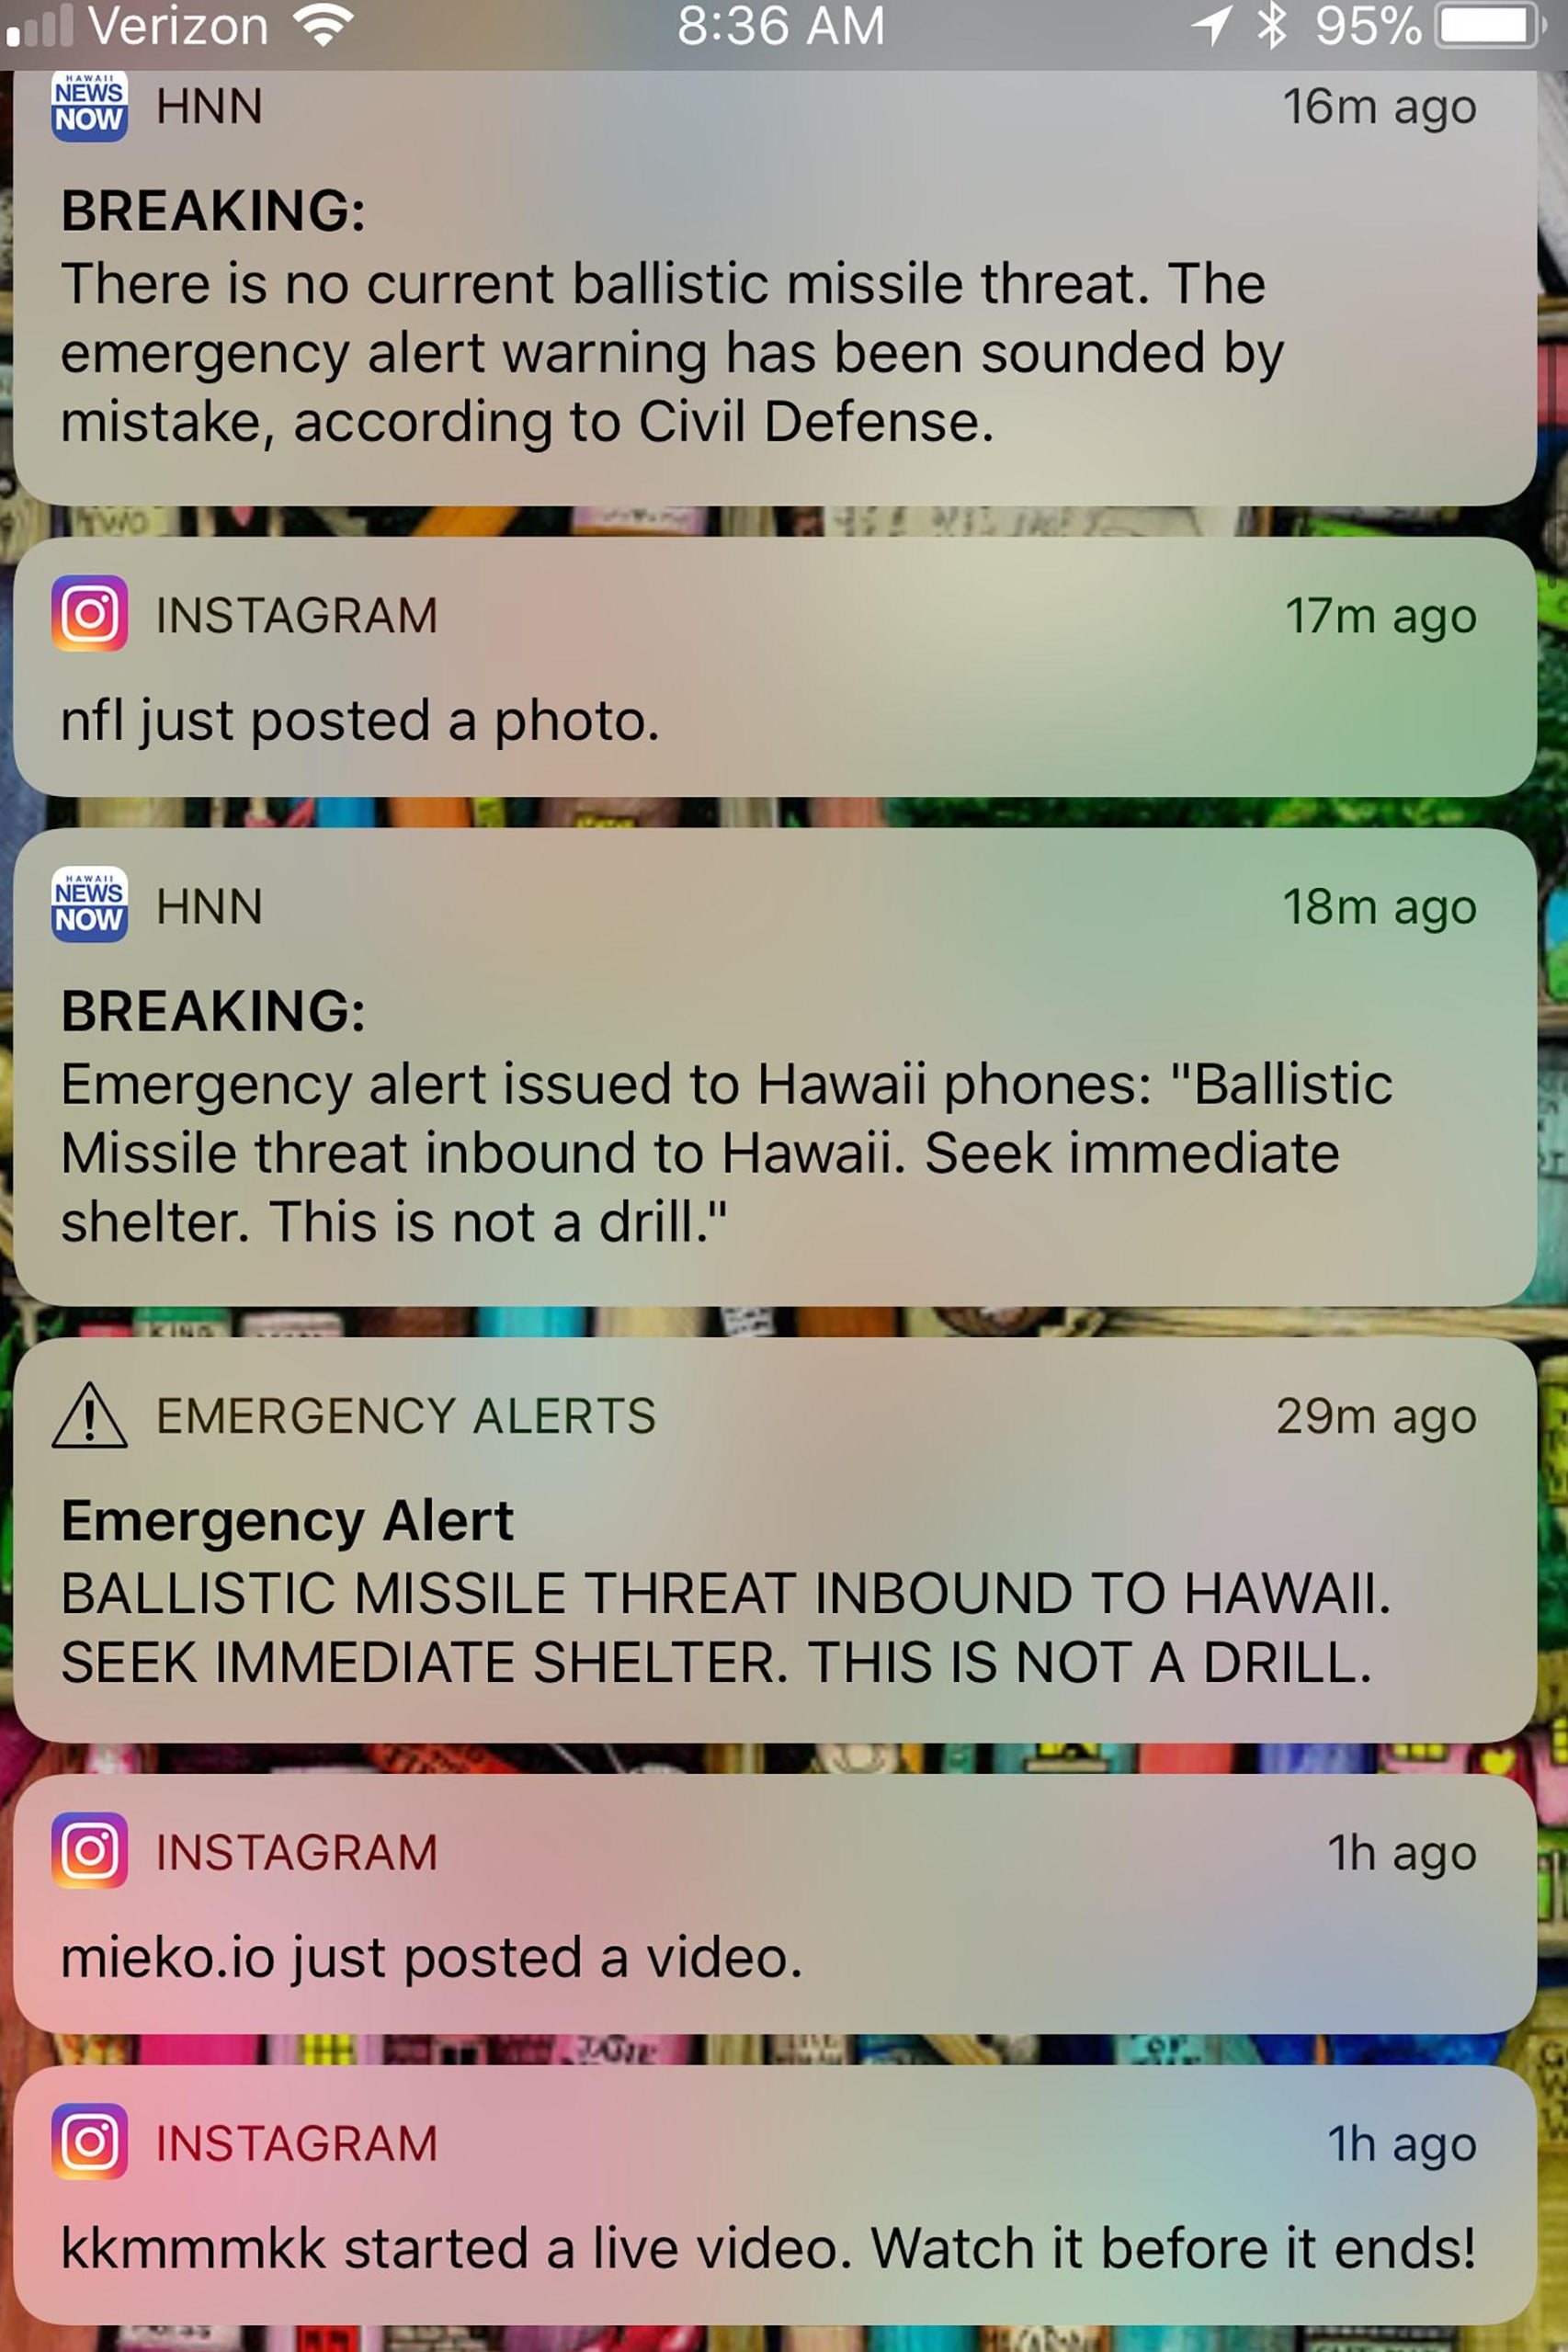 This photo illustration screenshot taken by the photographer of his cell phone shows messages of emergency alerts on January 13, 2018 of Honolulu, Hawaii. 
Social media ignited on January 13, 2018 after apparent screenshots of cell phone emergency alerts warning of a 'ballistic missile threat inbound to Hawaii' began circulating, which US officials quickly dismissed as 'false.''Hawaii - this is a false alarm,' wrote Democratic Representative Tulsi Gabbard on Twitter. 'I have confirmed with officials there is no incoming missile.' The Hawaii Emergency Management Agency also confirmed there is 'NO missile threat to Hawaii.' US military spokesman David Benham said the US Pacific Command 'has detected no ballistic missile threat to Hawaii. Earlier message was sent in error,' adding that the US state would 'send out a correction message as soon as possible.'
 / AFP PHOTO / Eugene Tanner        (Photo credit should read EUGENE TANNER/AFP/Getty Images)